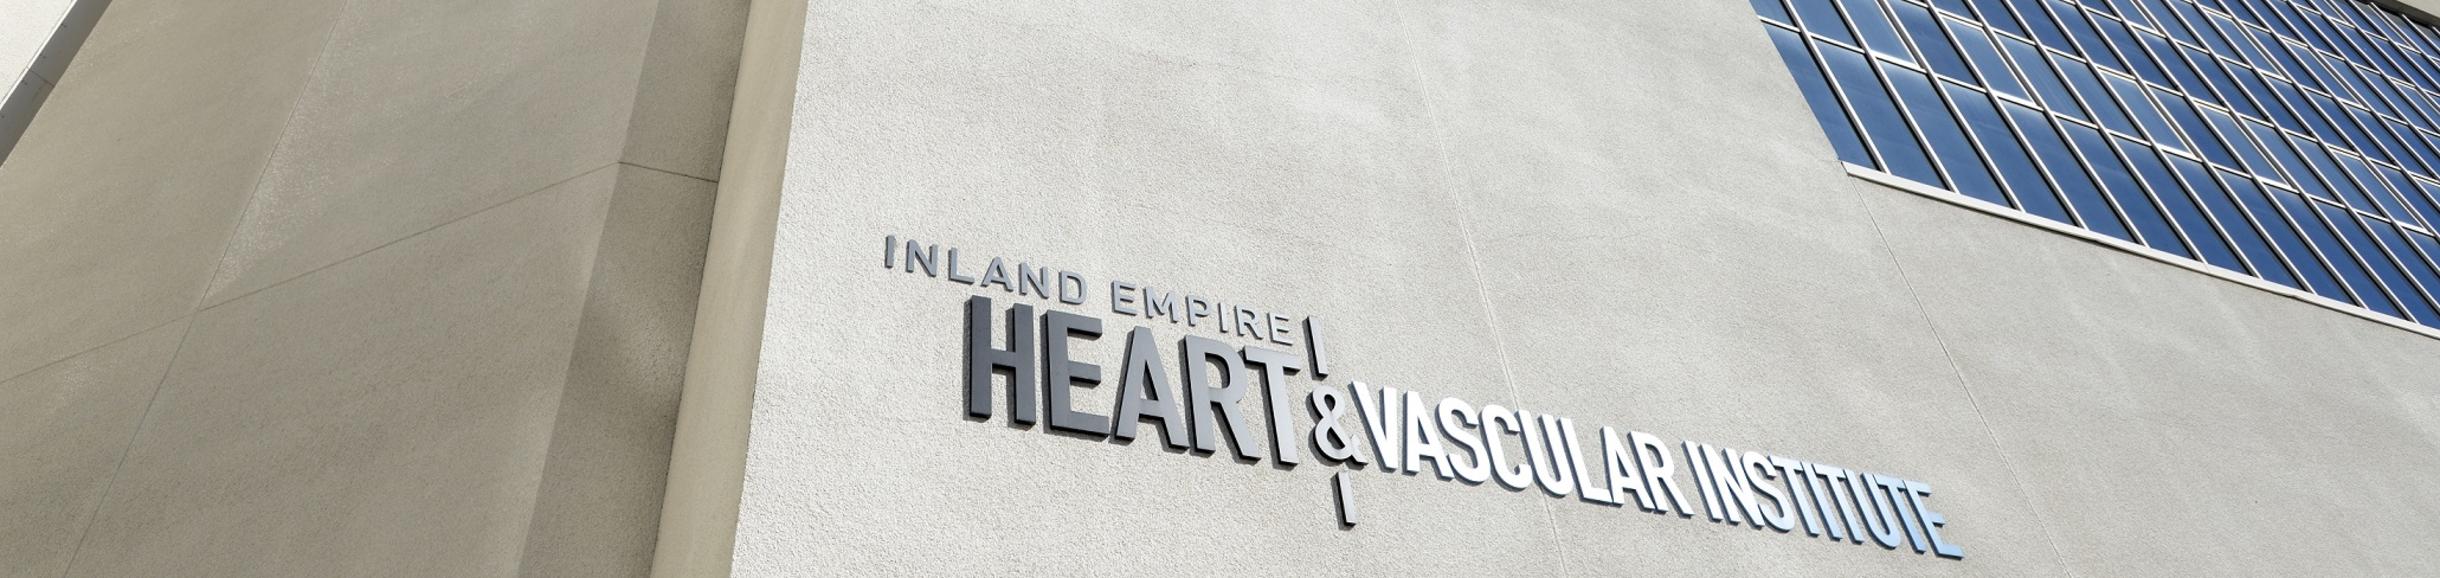 Heart and Vascular institute building